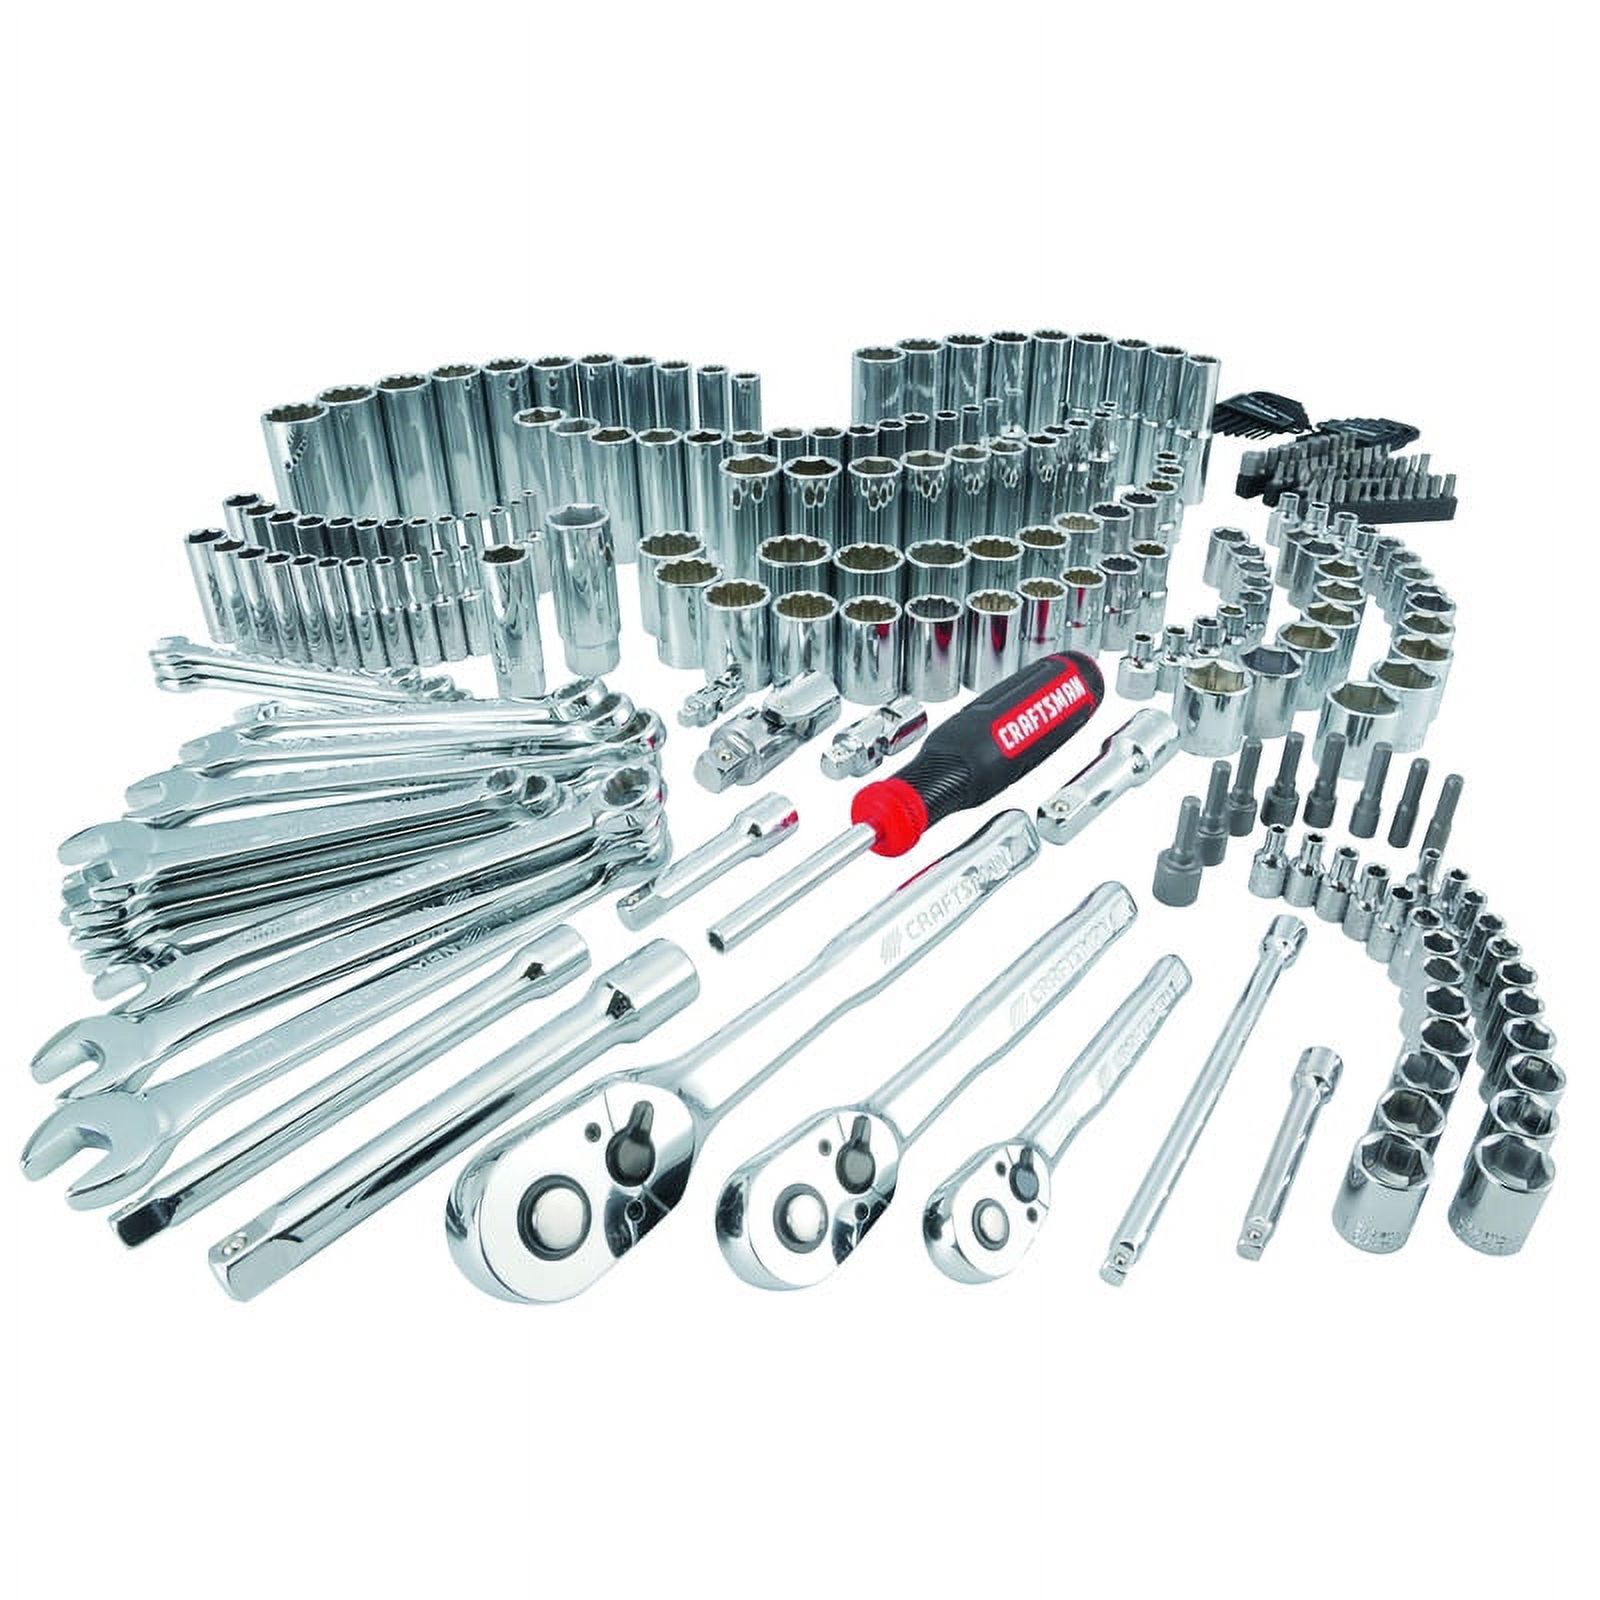 Craftsman 1/4, 3/8 and 1/2 in. drive Metric and SAE 6 and 12 Point Mechanics Tool Set 308 pc. - image 1 of 6